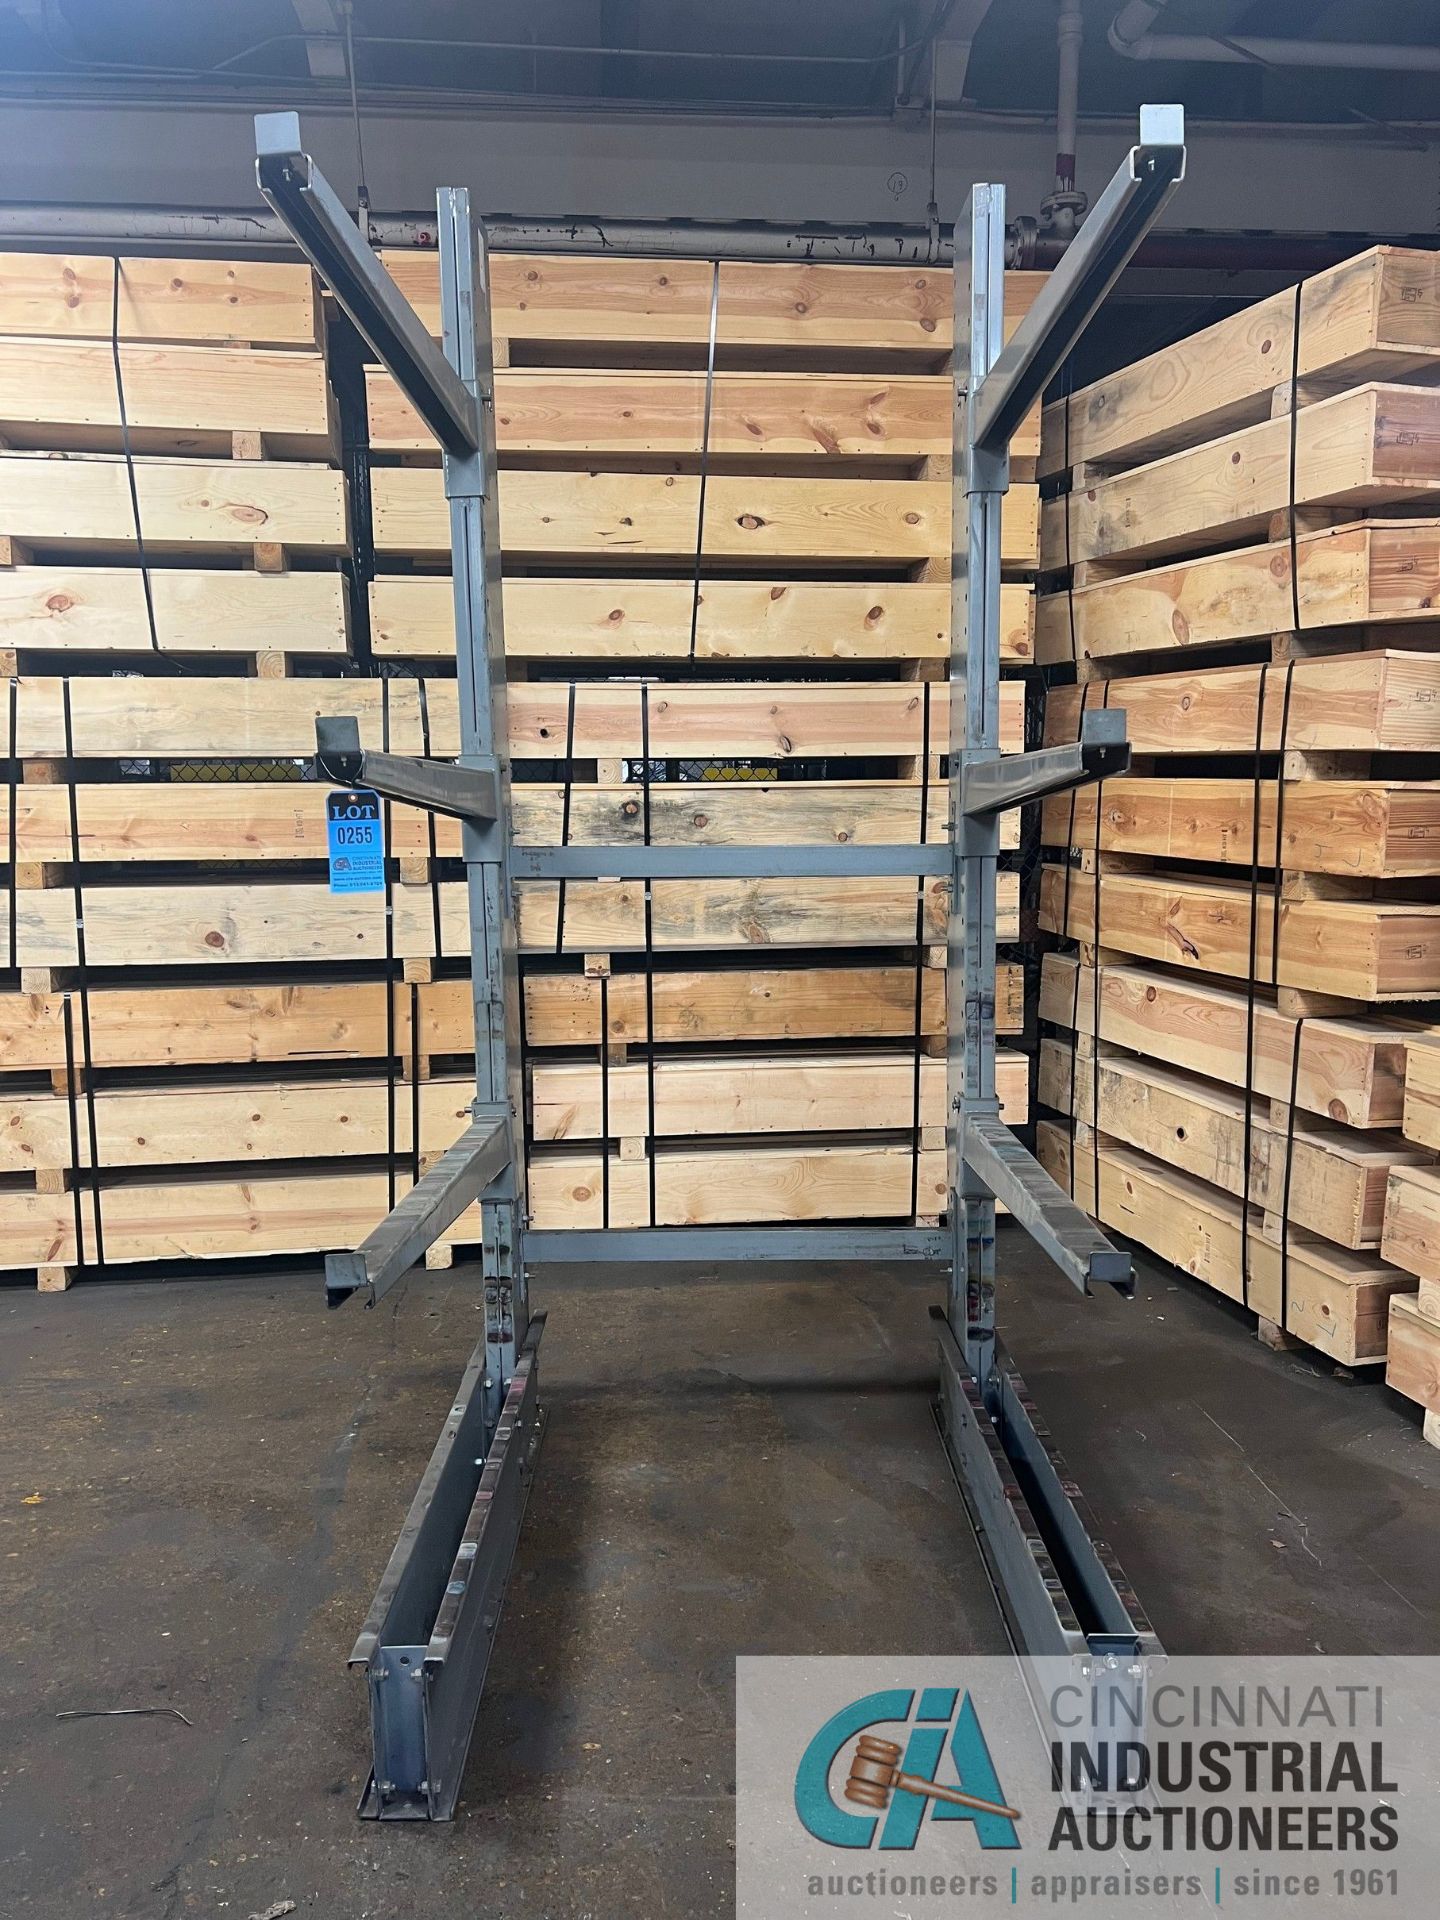 CANTILEVER RACK - 10' TALL X 53' WIDE X 48" ARMS - Seller will disassemble